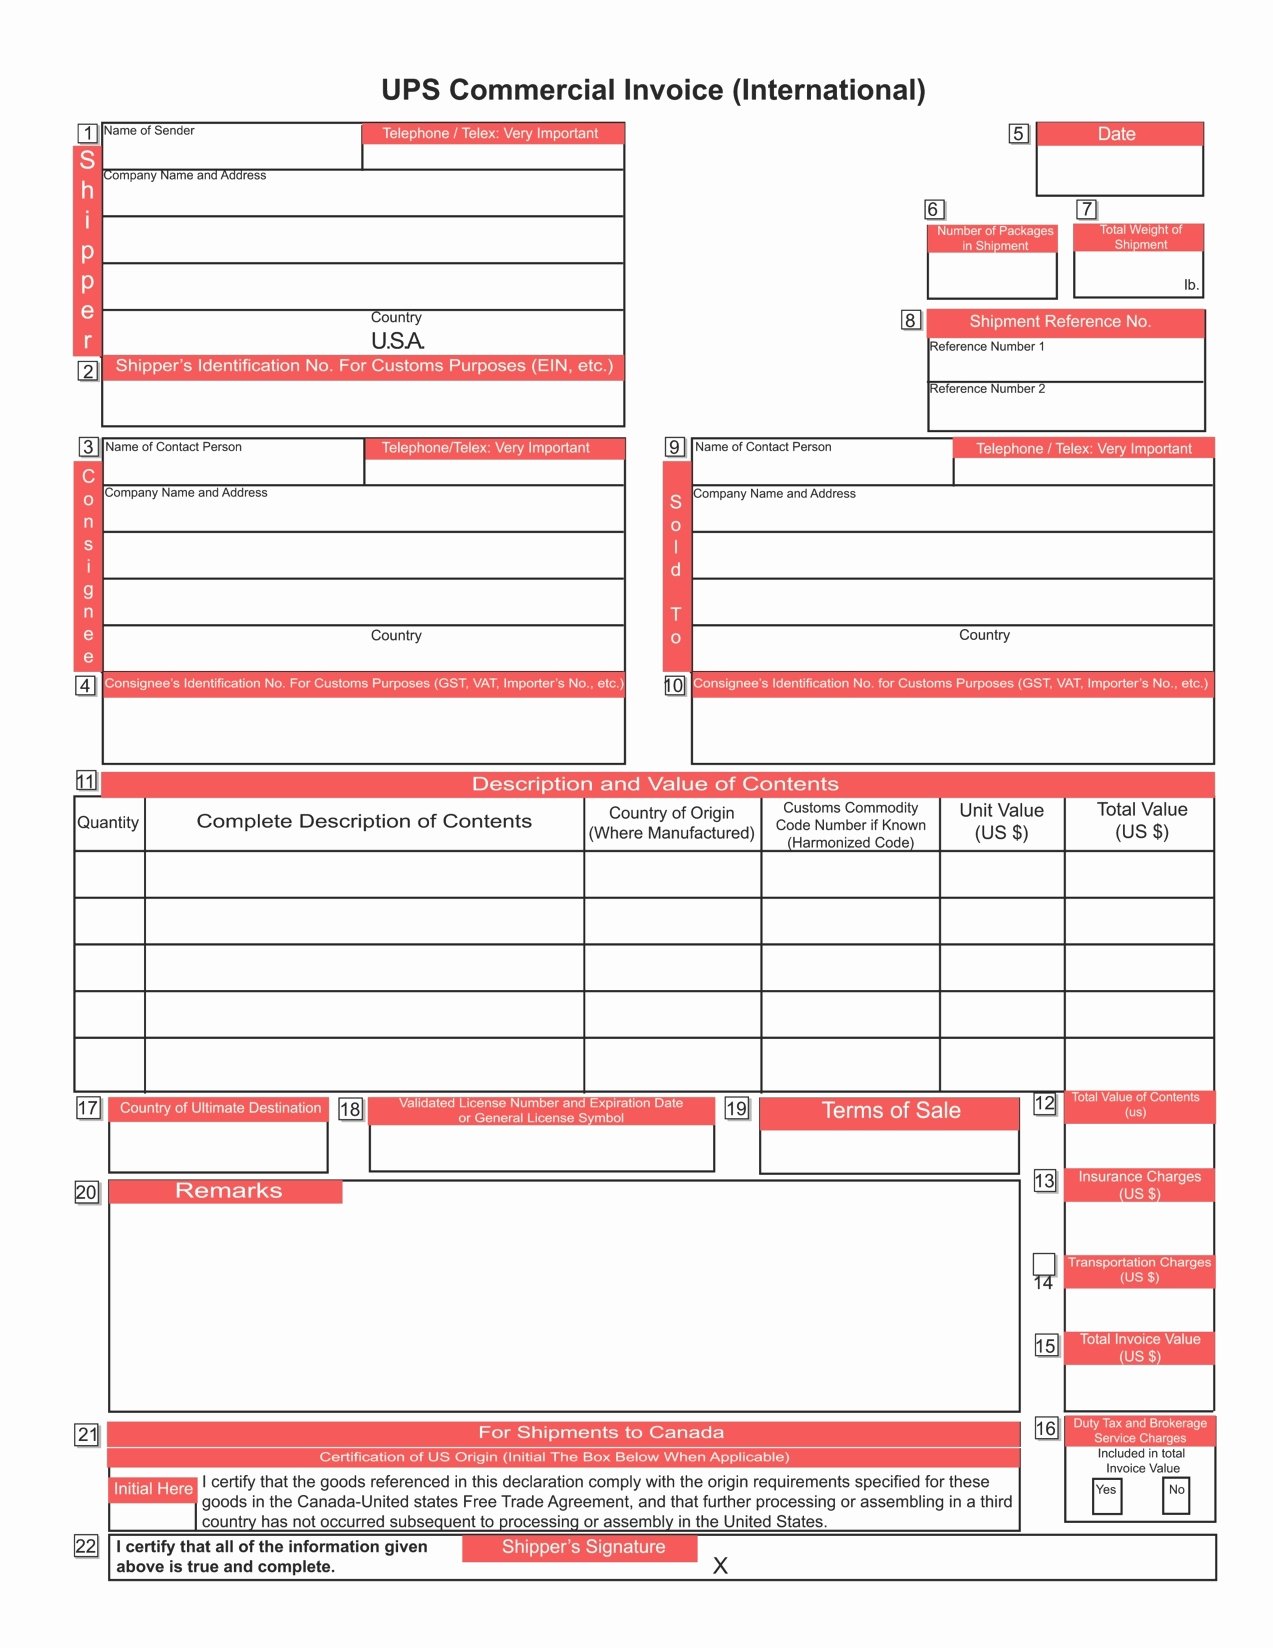 Free Commercial Invoice Template New Ups Mercial Invoice Invoice Template Ideas